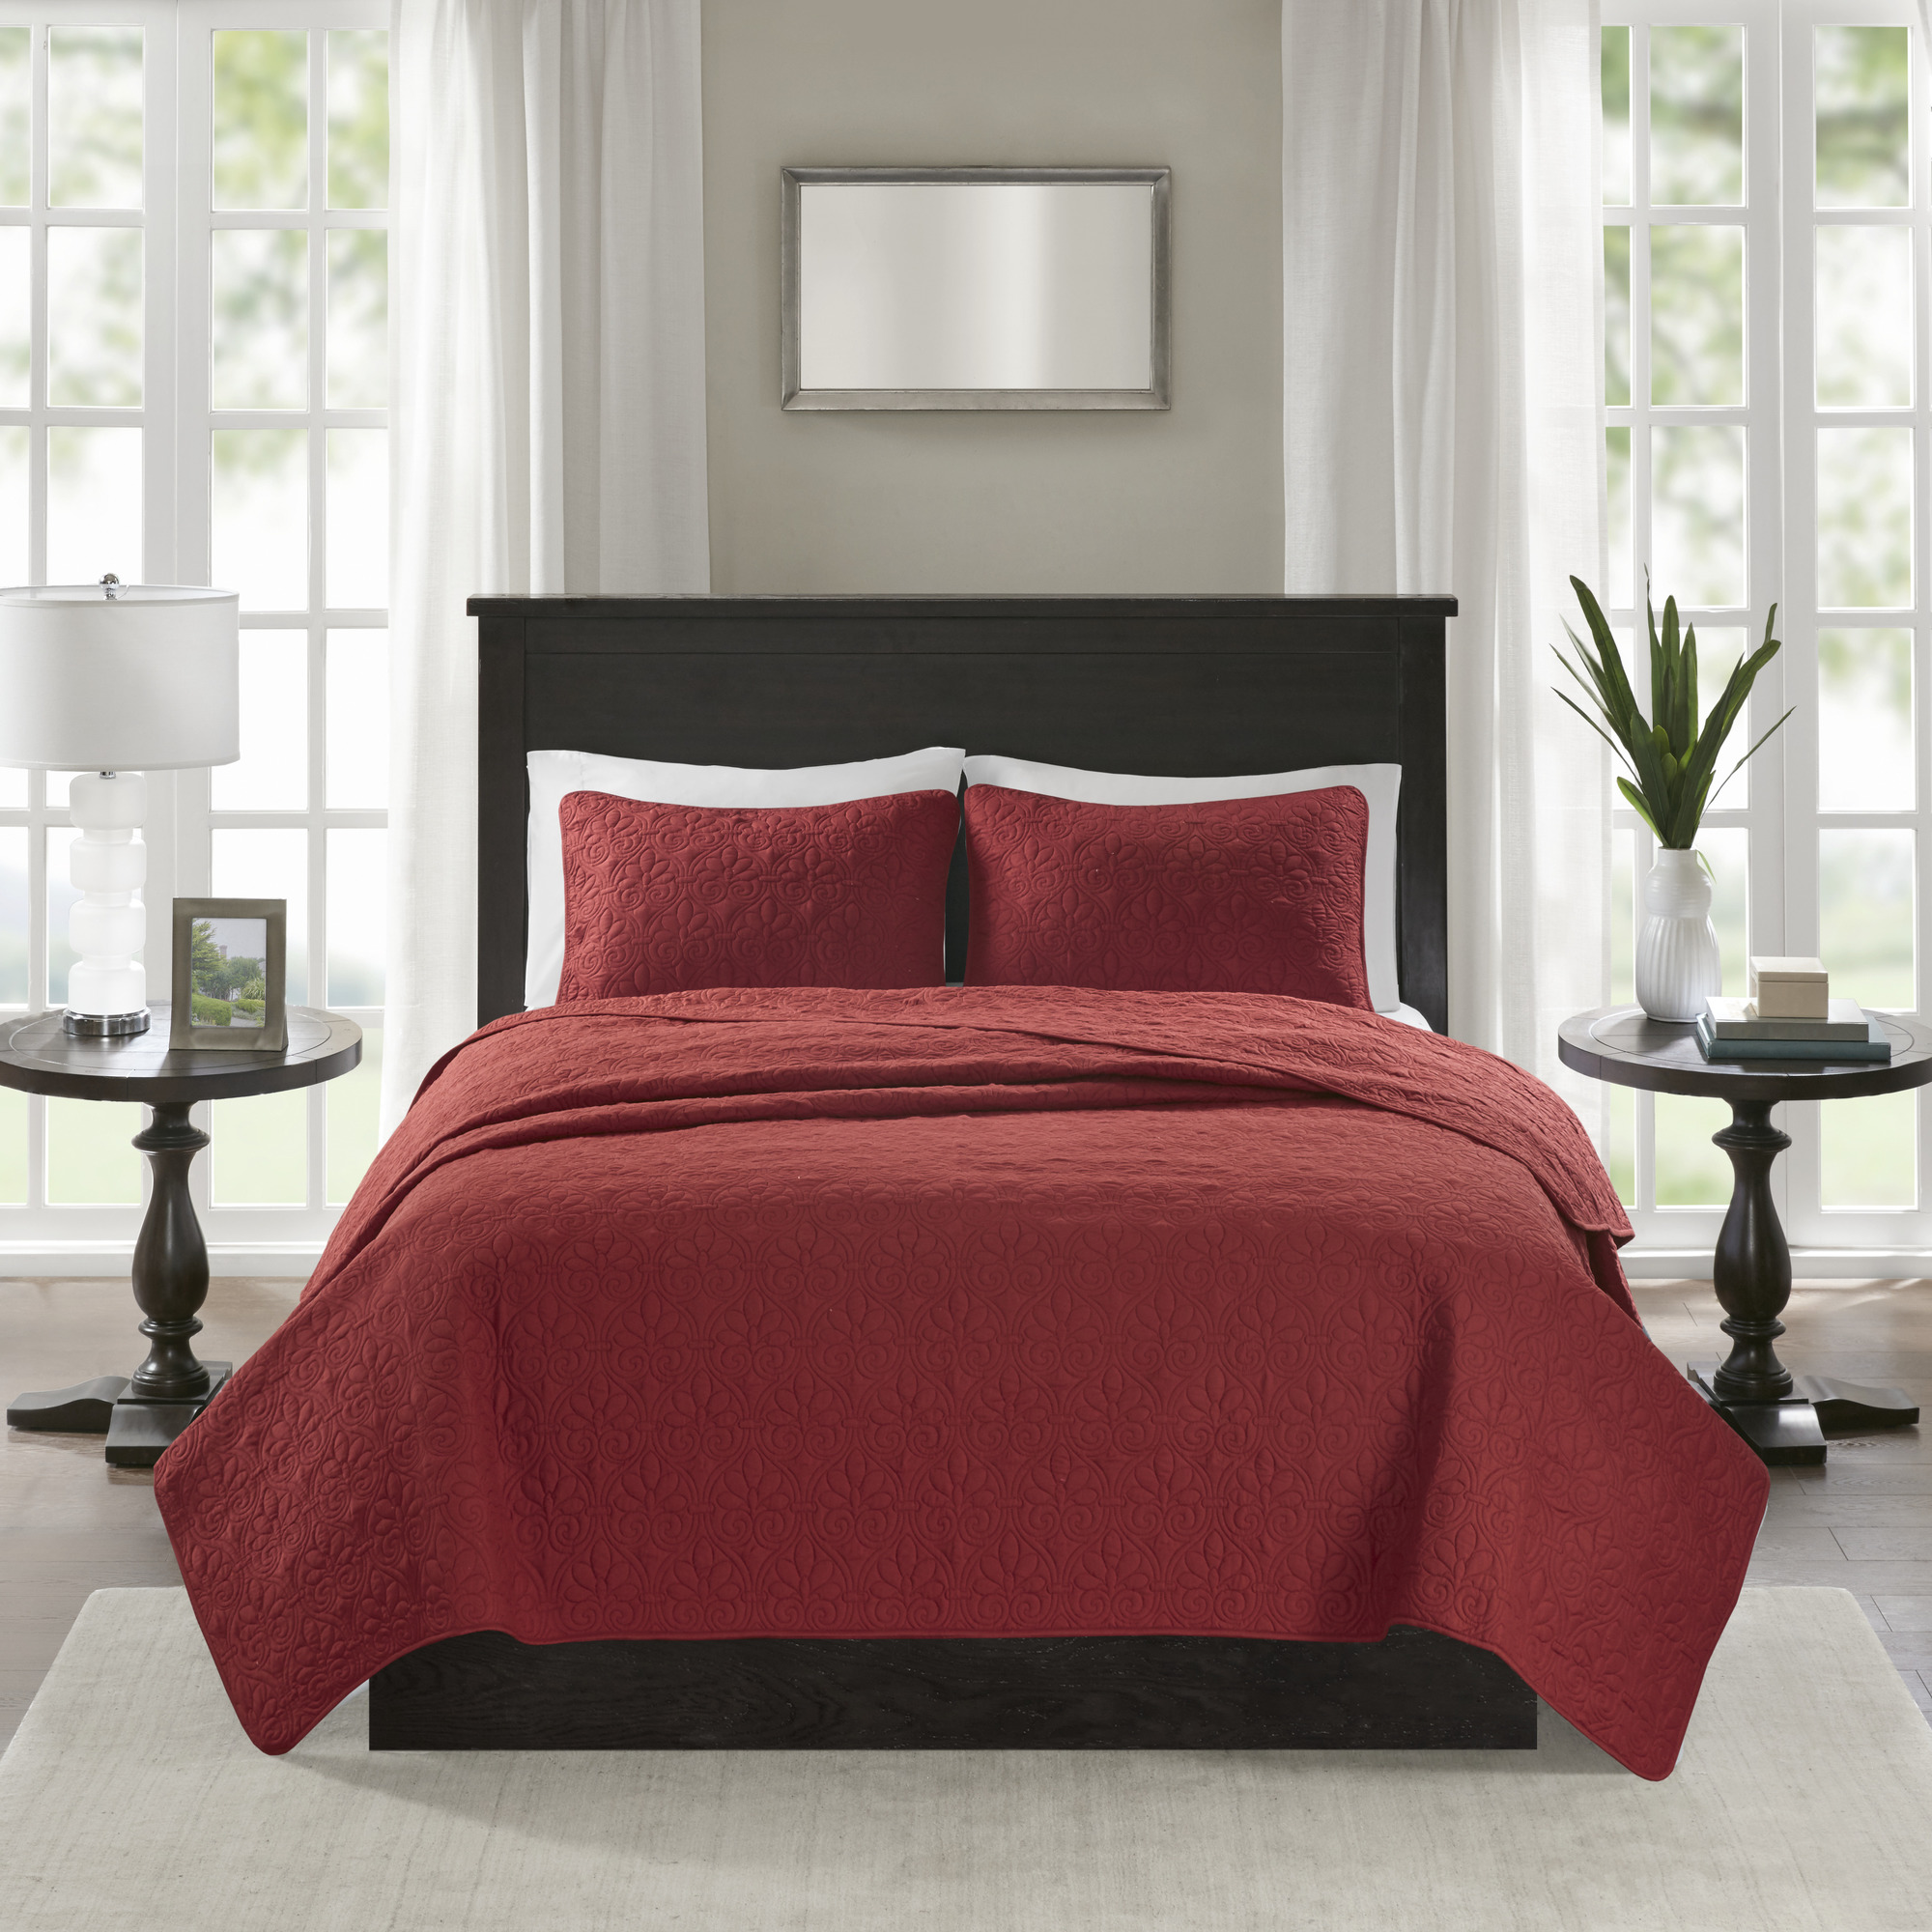 Home Essence Vancouver Super Soft Reversible Coverlet Set, Full/Queen, Red - image 4 of 13